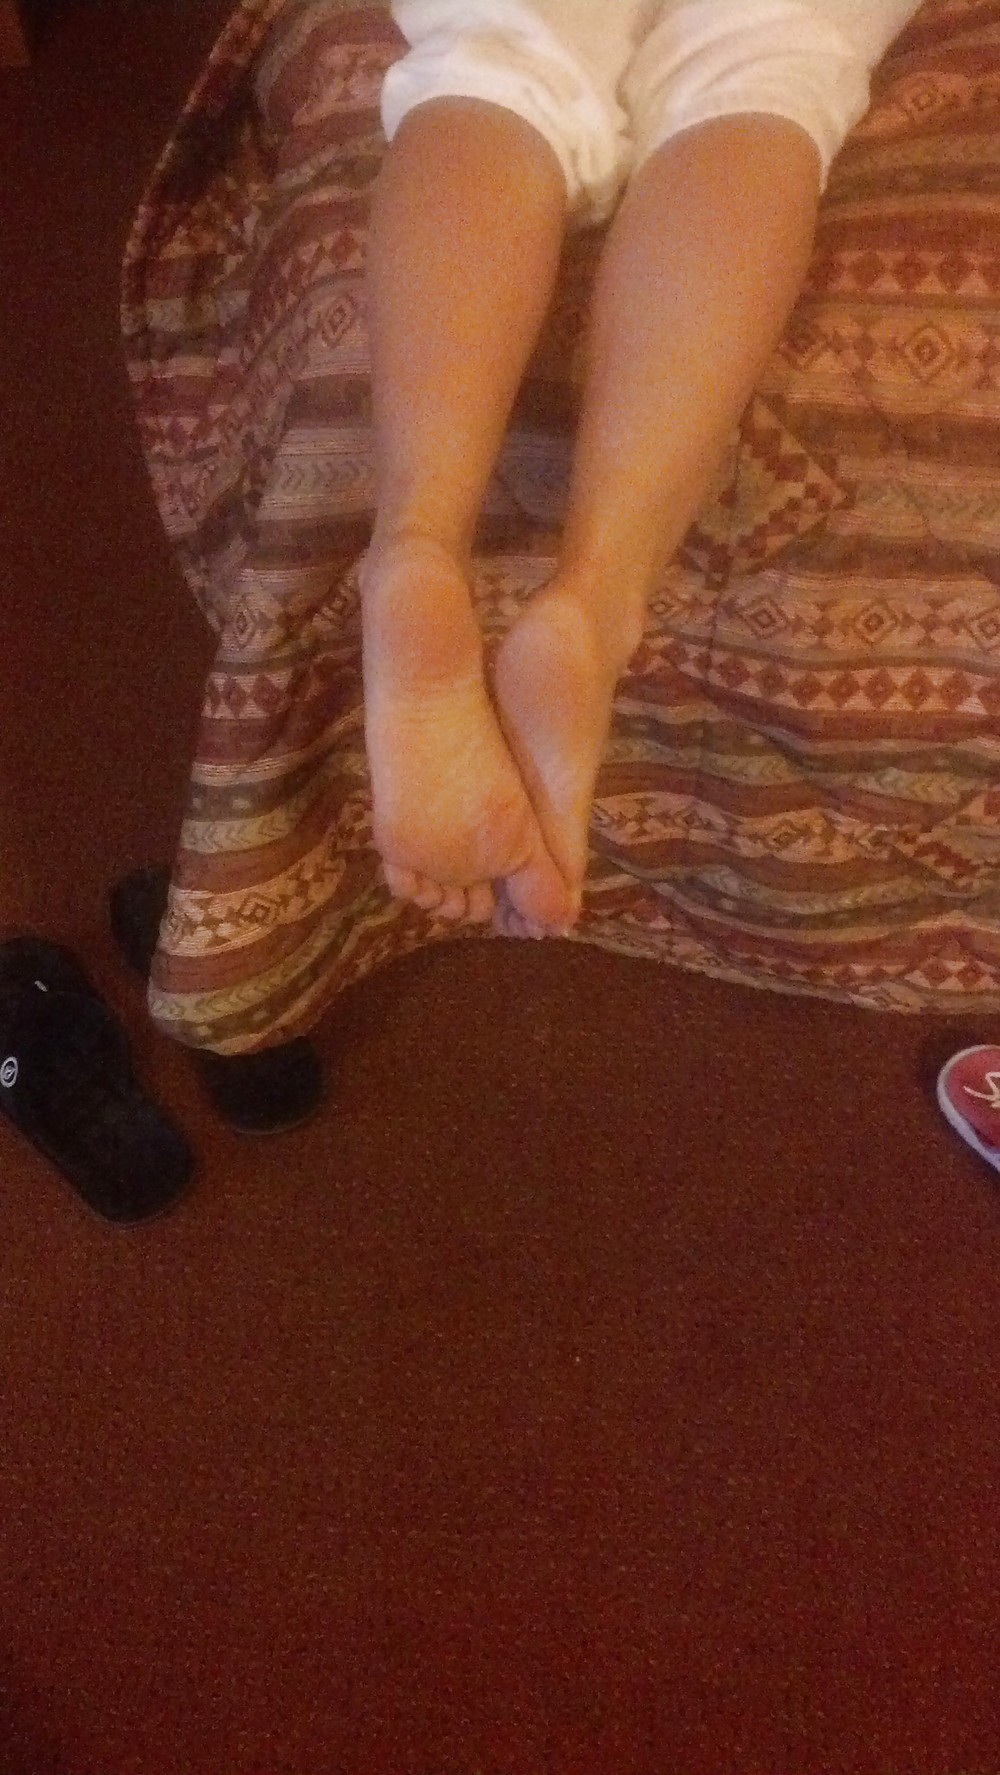 Sex wifes feet in hotel room waiting for cum image